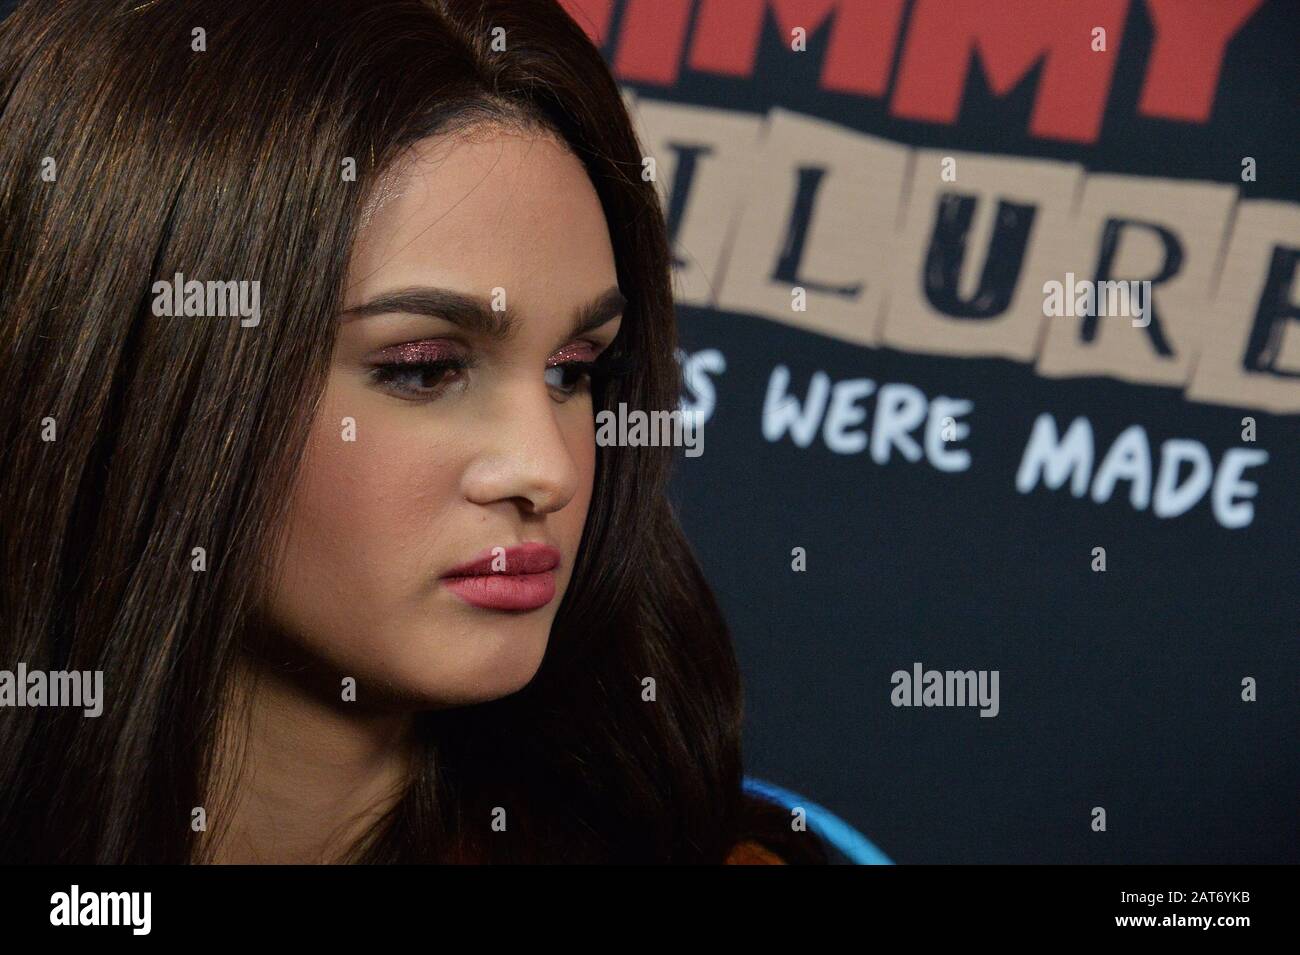 Los Angeles, United States. 31st Jan, 2020. Rapper and Lela Brown attends the premiere of the motion picture dramatic fantasy 'Timmy Failure: Mistakes Were Made' at the El Capitan Theatre in the Hollywood section of Los Angeles on Thursday, January 30, 2020. Storyline: Based on the best-selling book of the same name, the film follows the hilarious exploits of quirky, deadpan hero, Timmy Failure, who, along with his 1,500-pound polar bear partner operates Total Failure Inc., a Portland detective agency. Photo by Jim Ruymen/UPI Credit: UPI/Alamy Live News Stock Photo